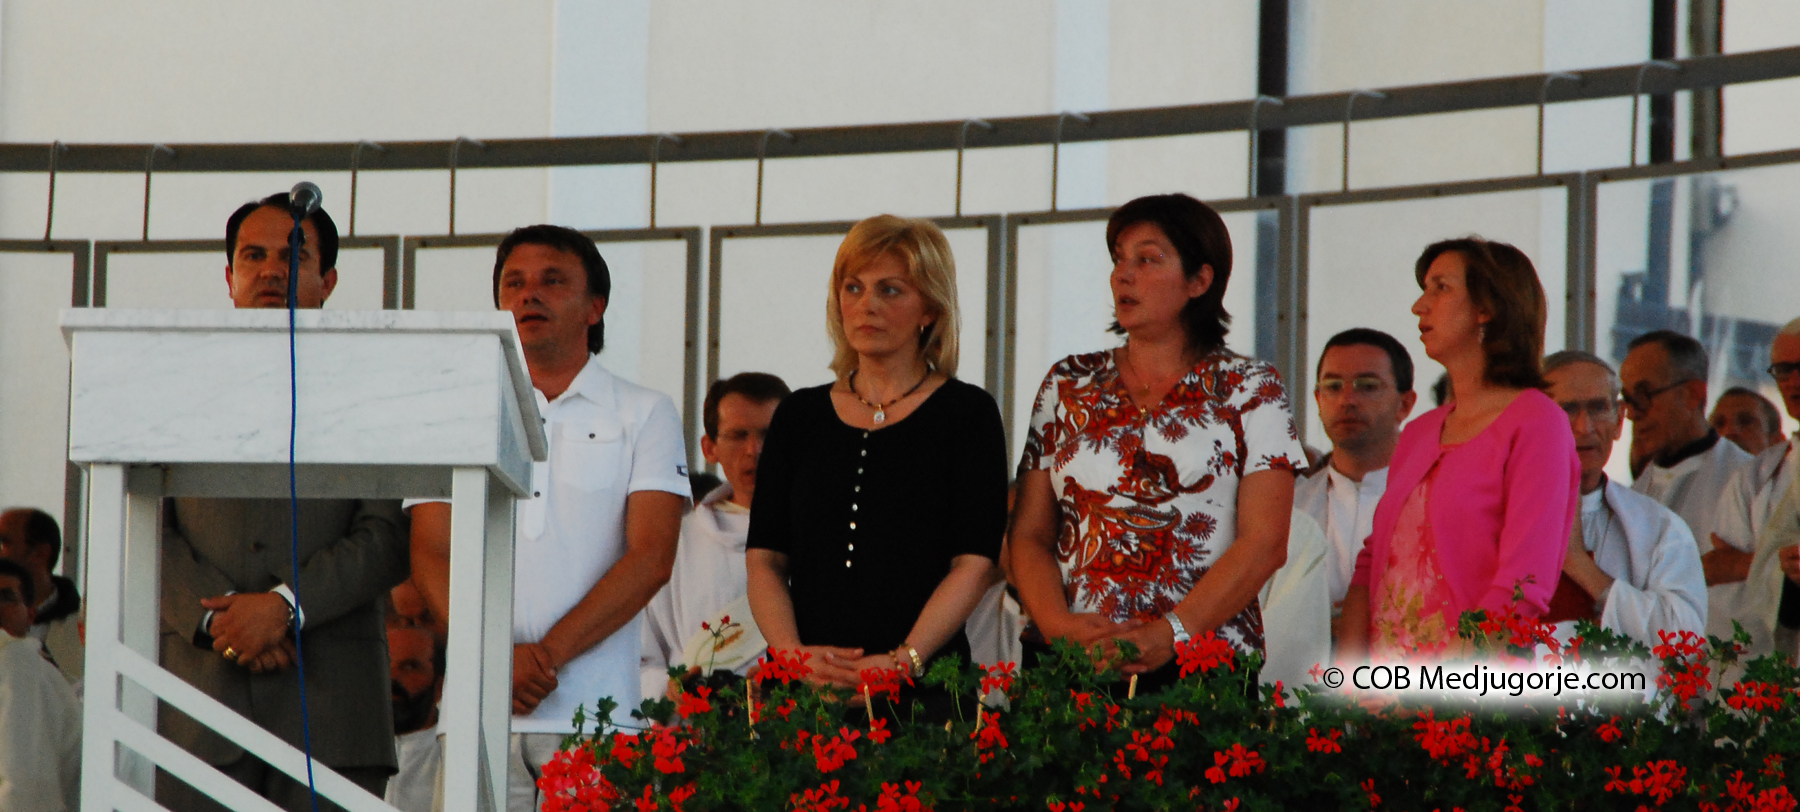 Five Visionaries from Medjugorje